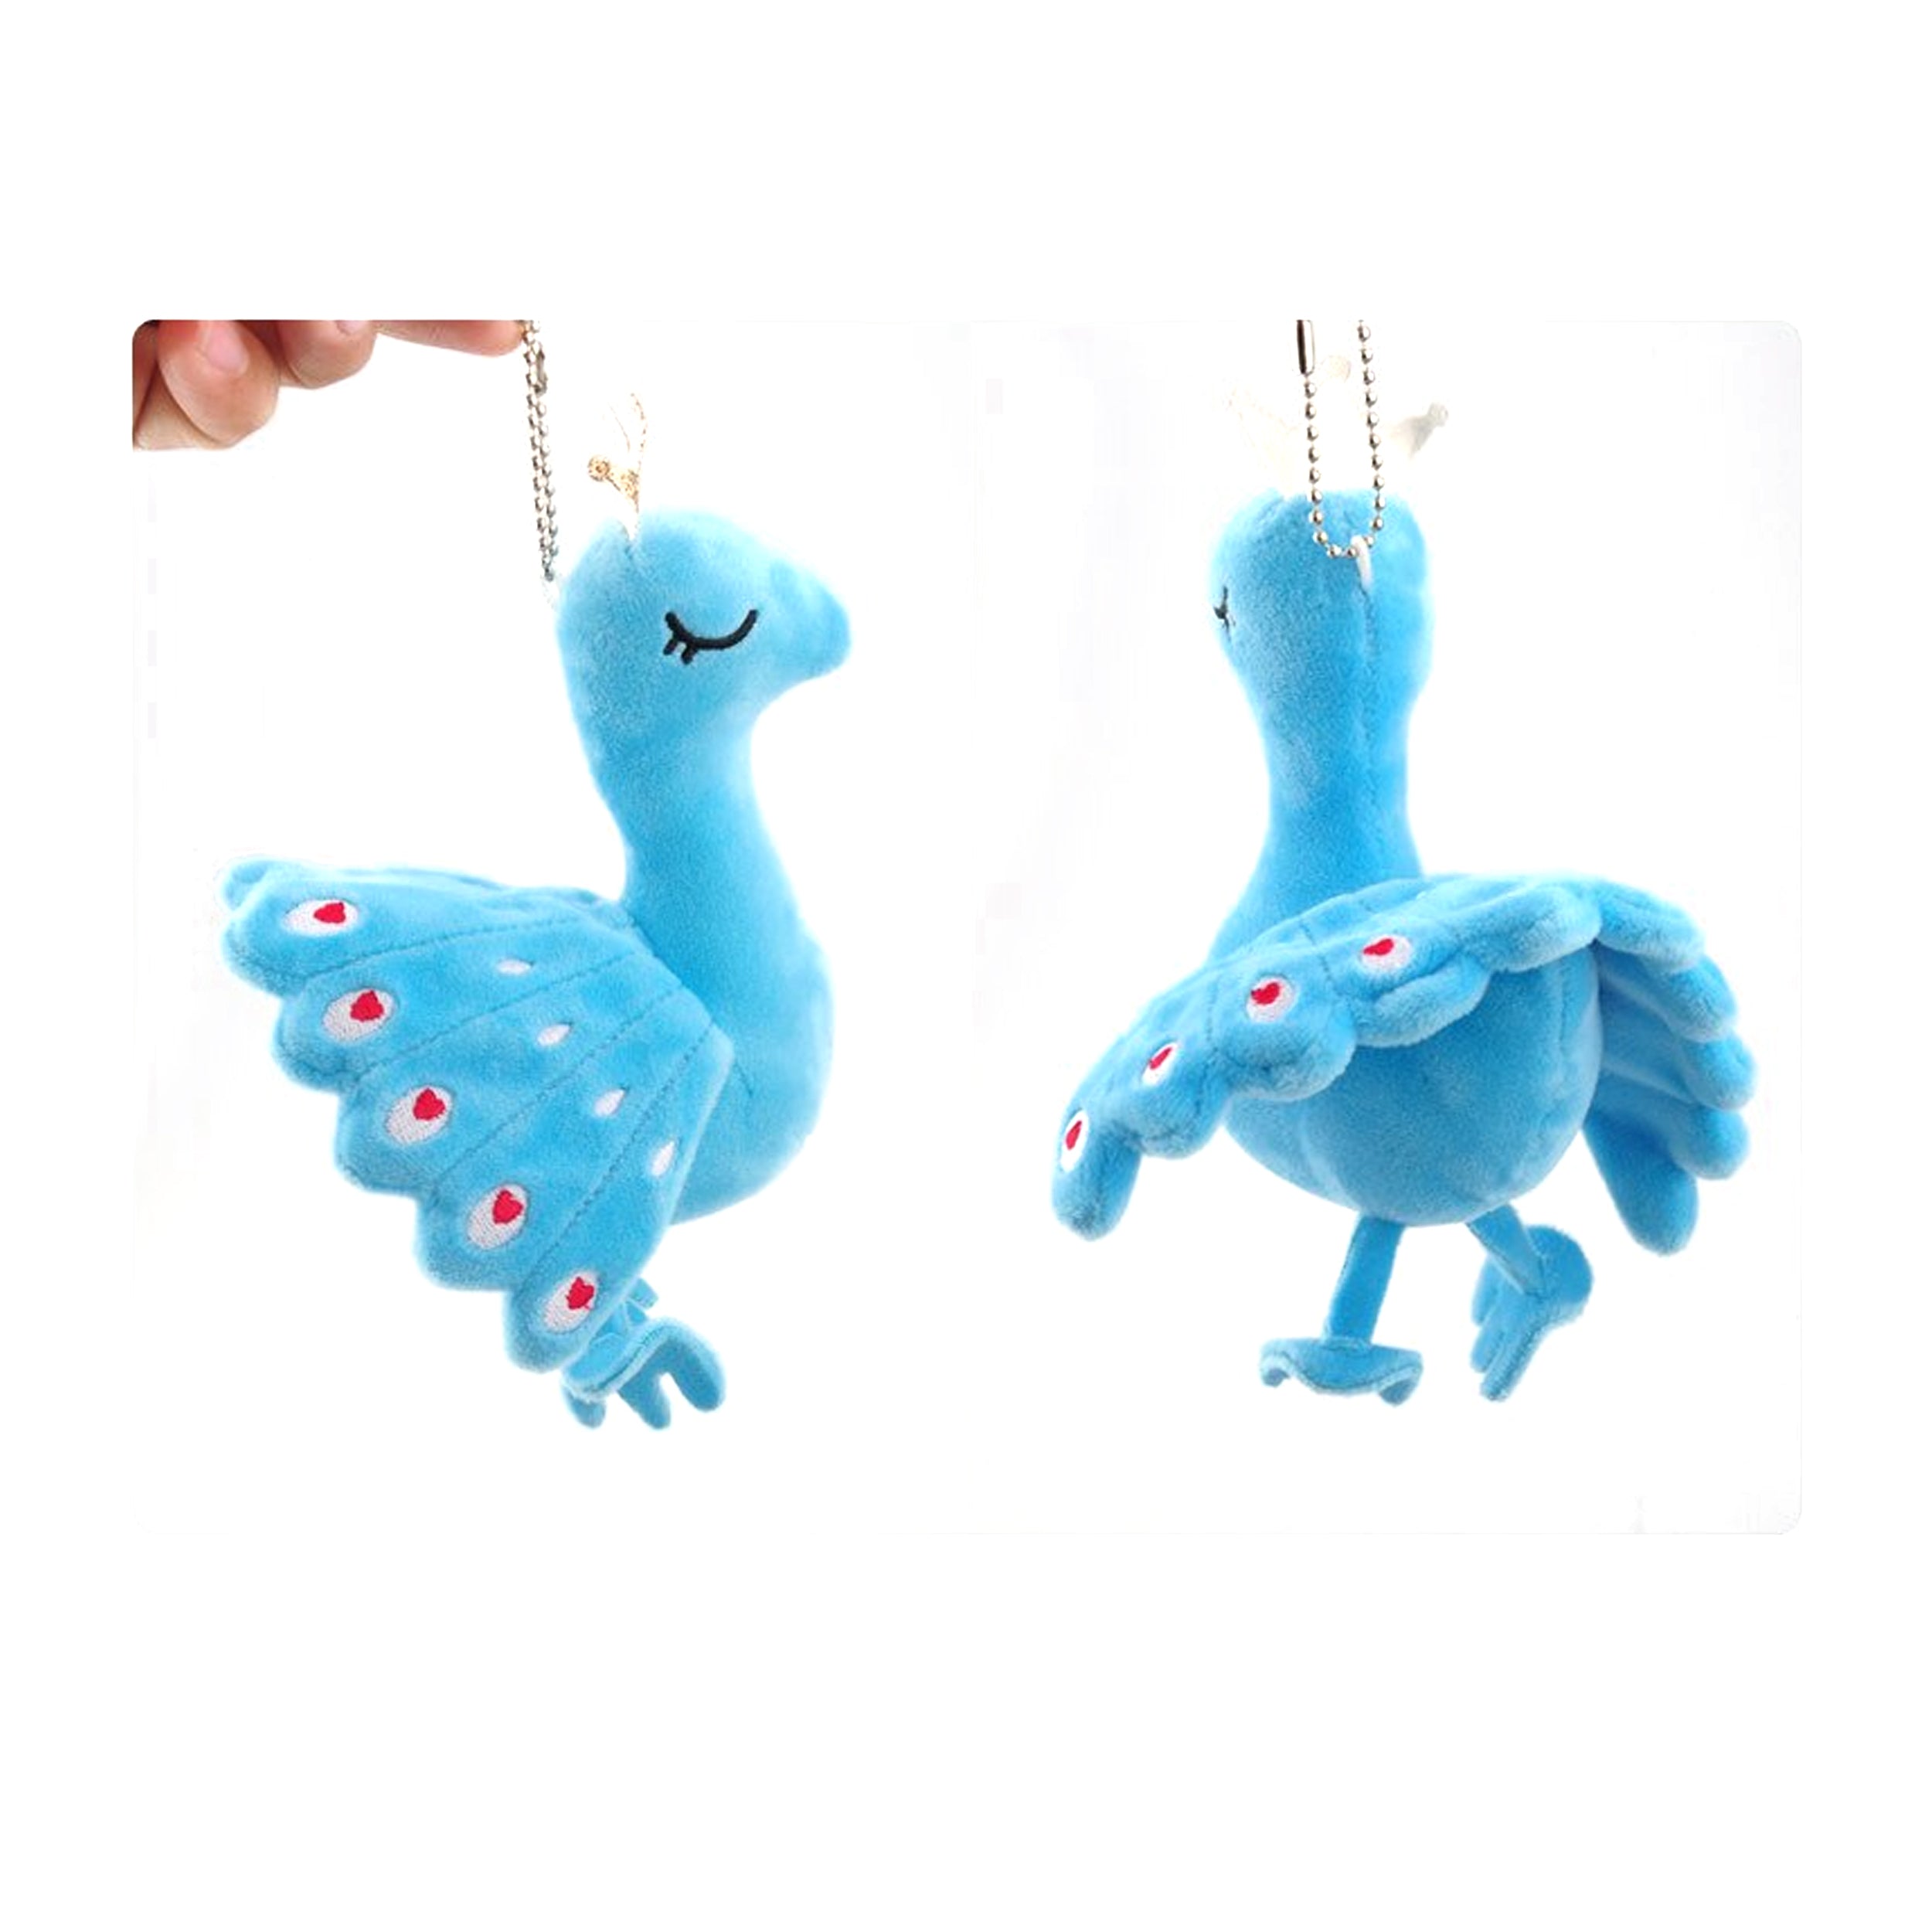 Add Some Color to Your Kid's Accessories with Our Beautiful Peacock Soft Plush Keychain Toy